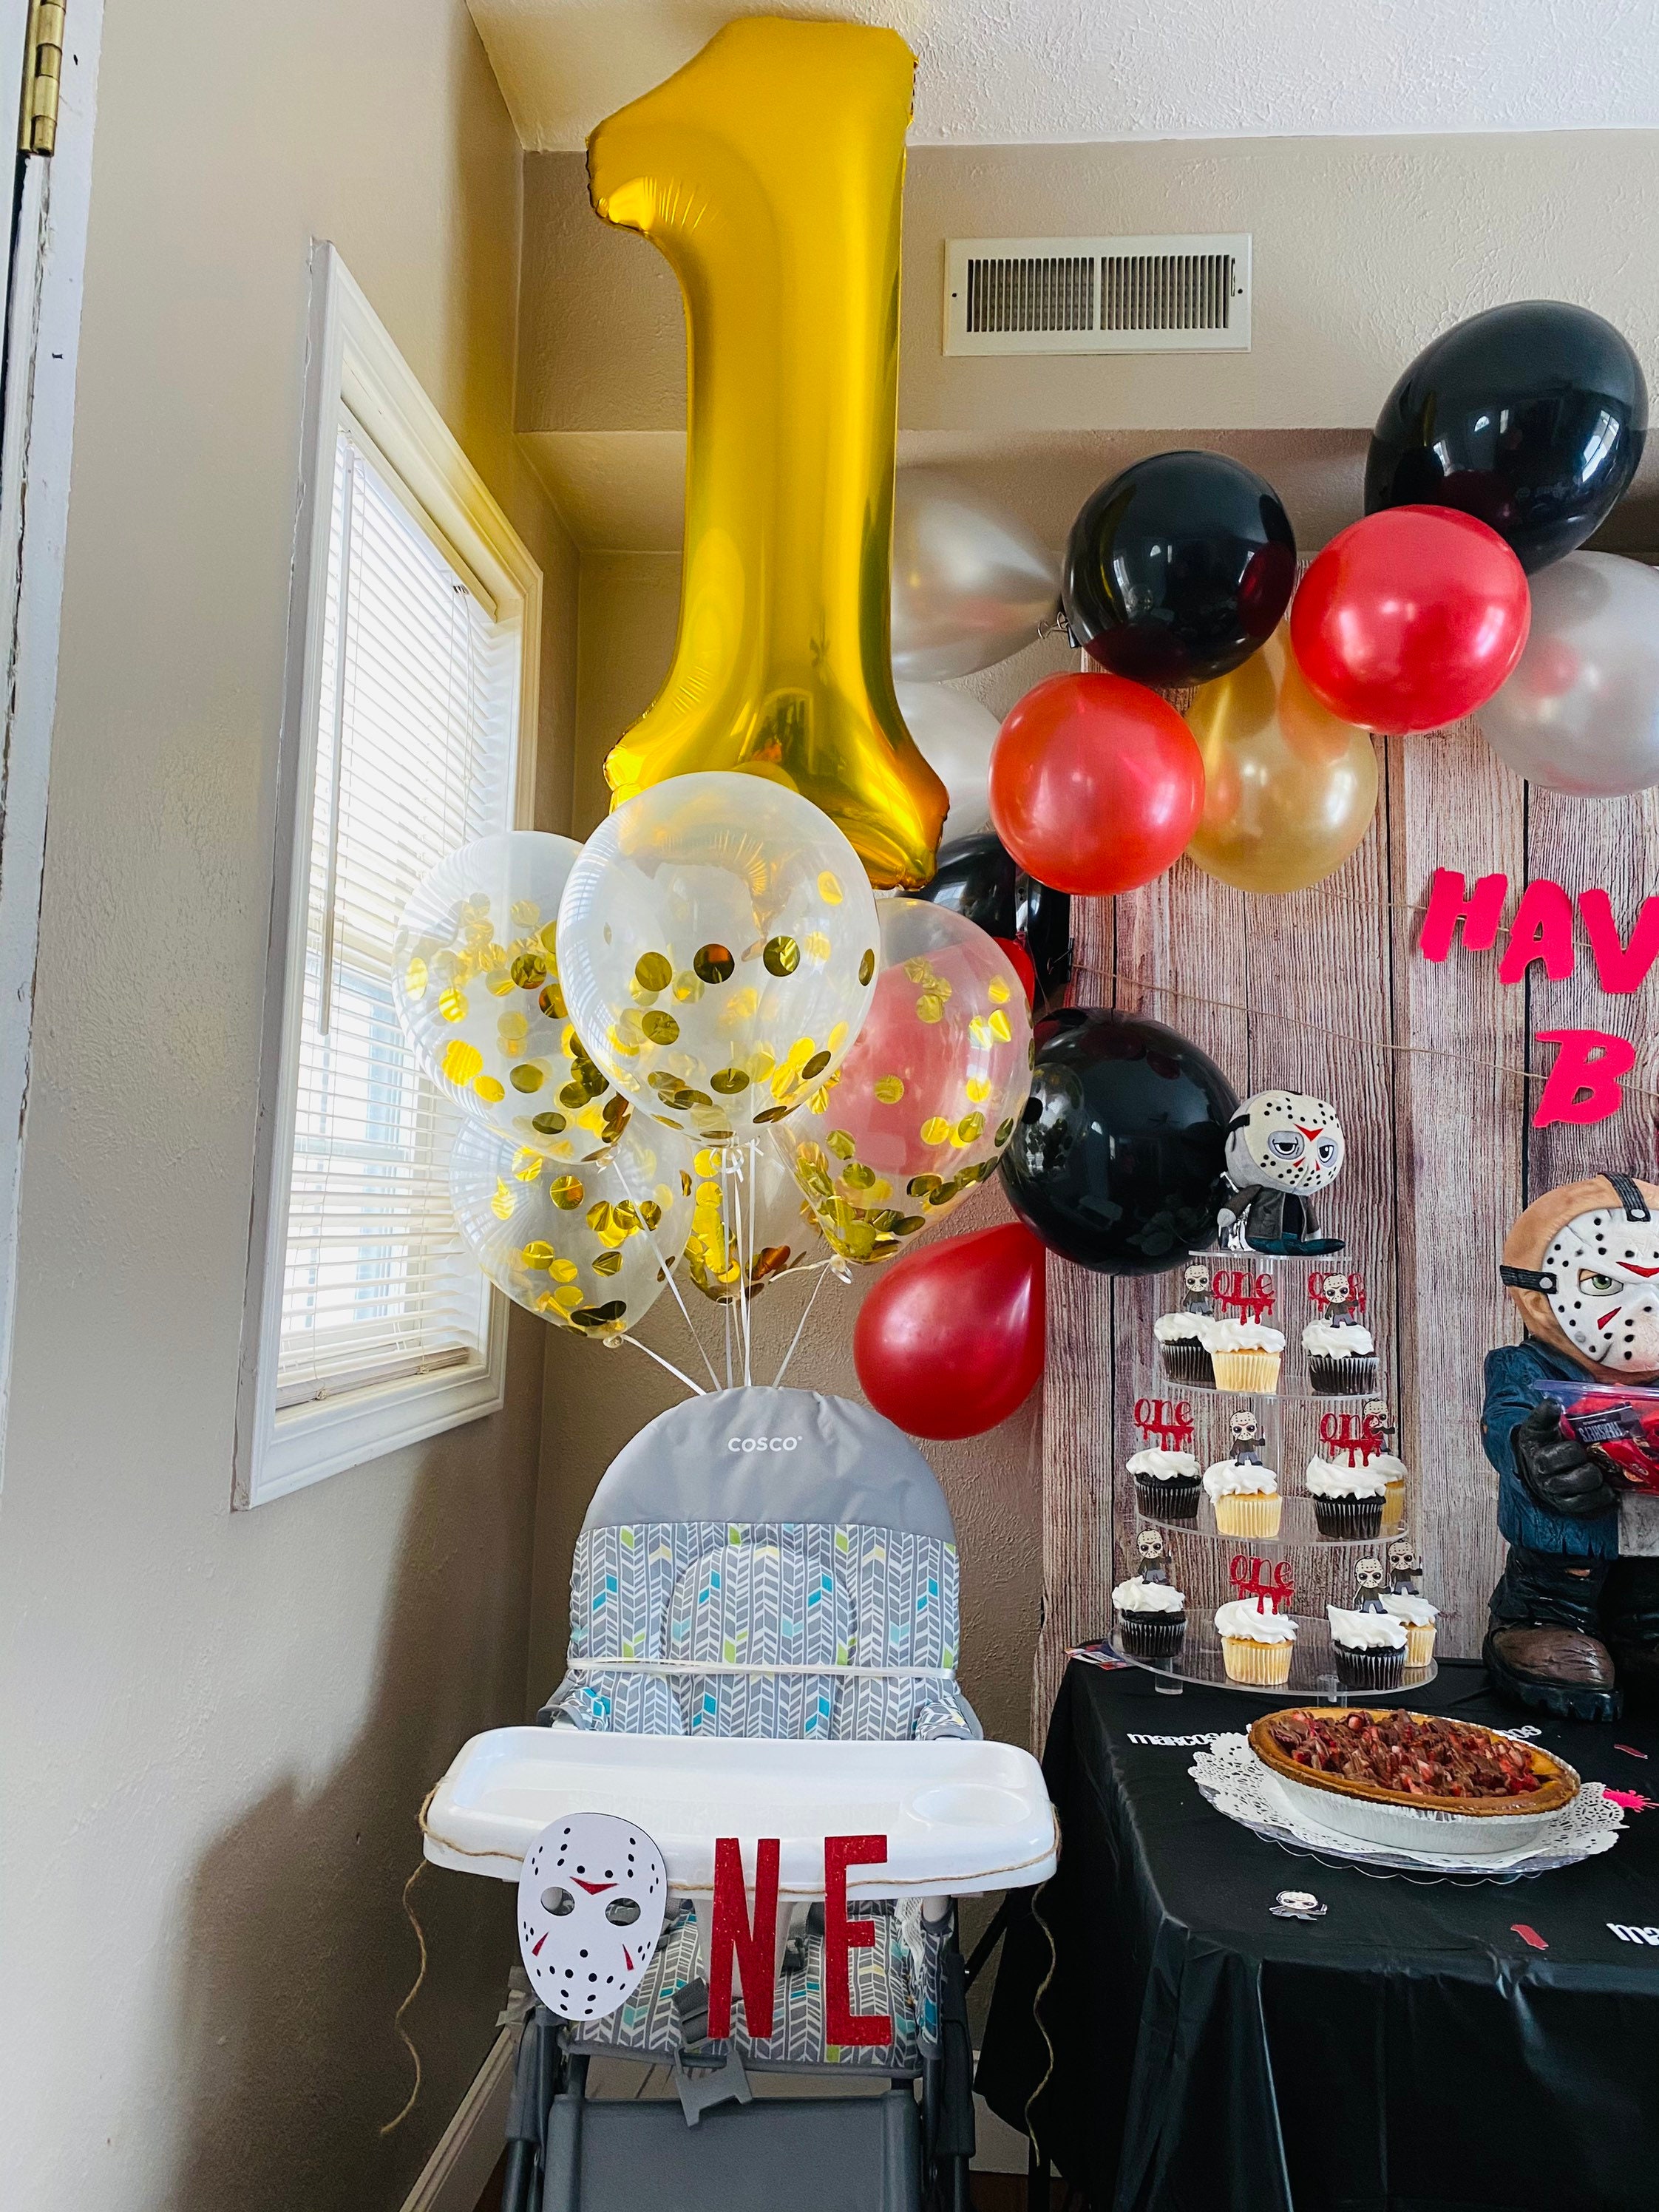 43 Friday the 13th Party Ideas - Fun Party Pop